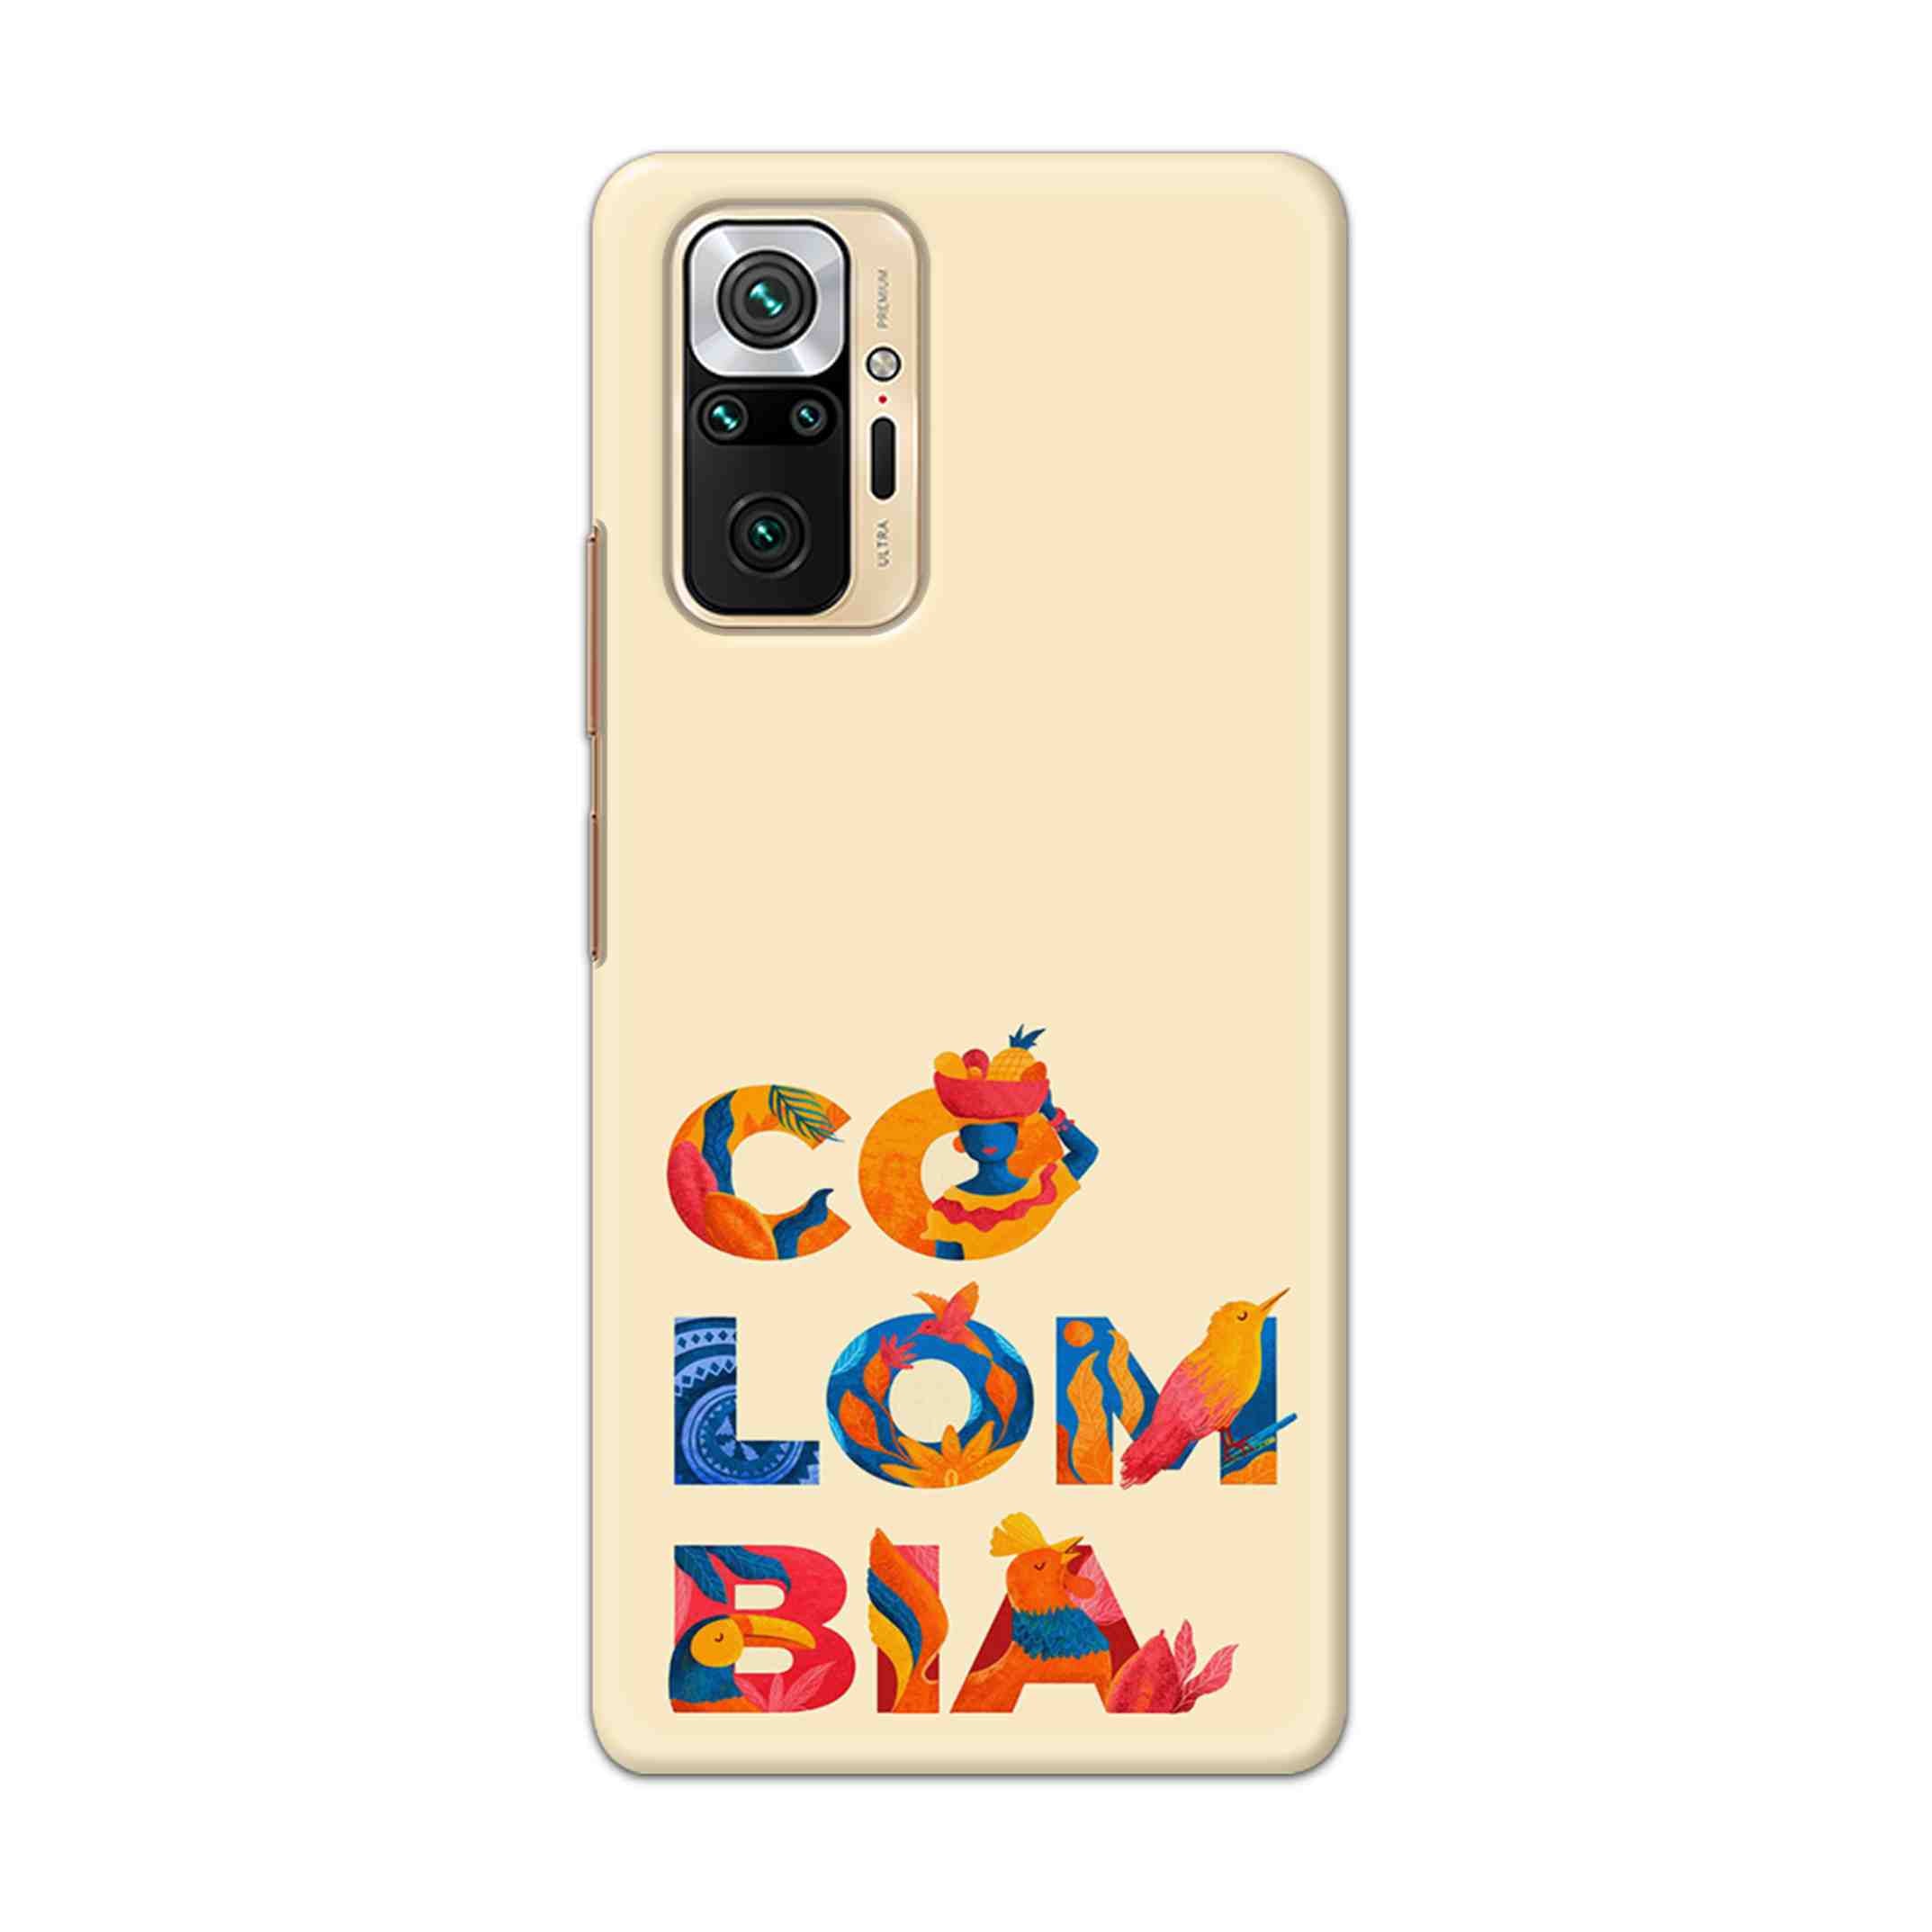 Buy Colombia Hard Back Mobile Phone Case Cover For Redmi Note 10 Pro Online